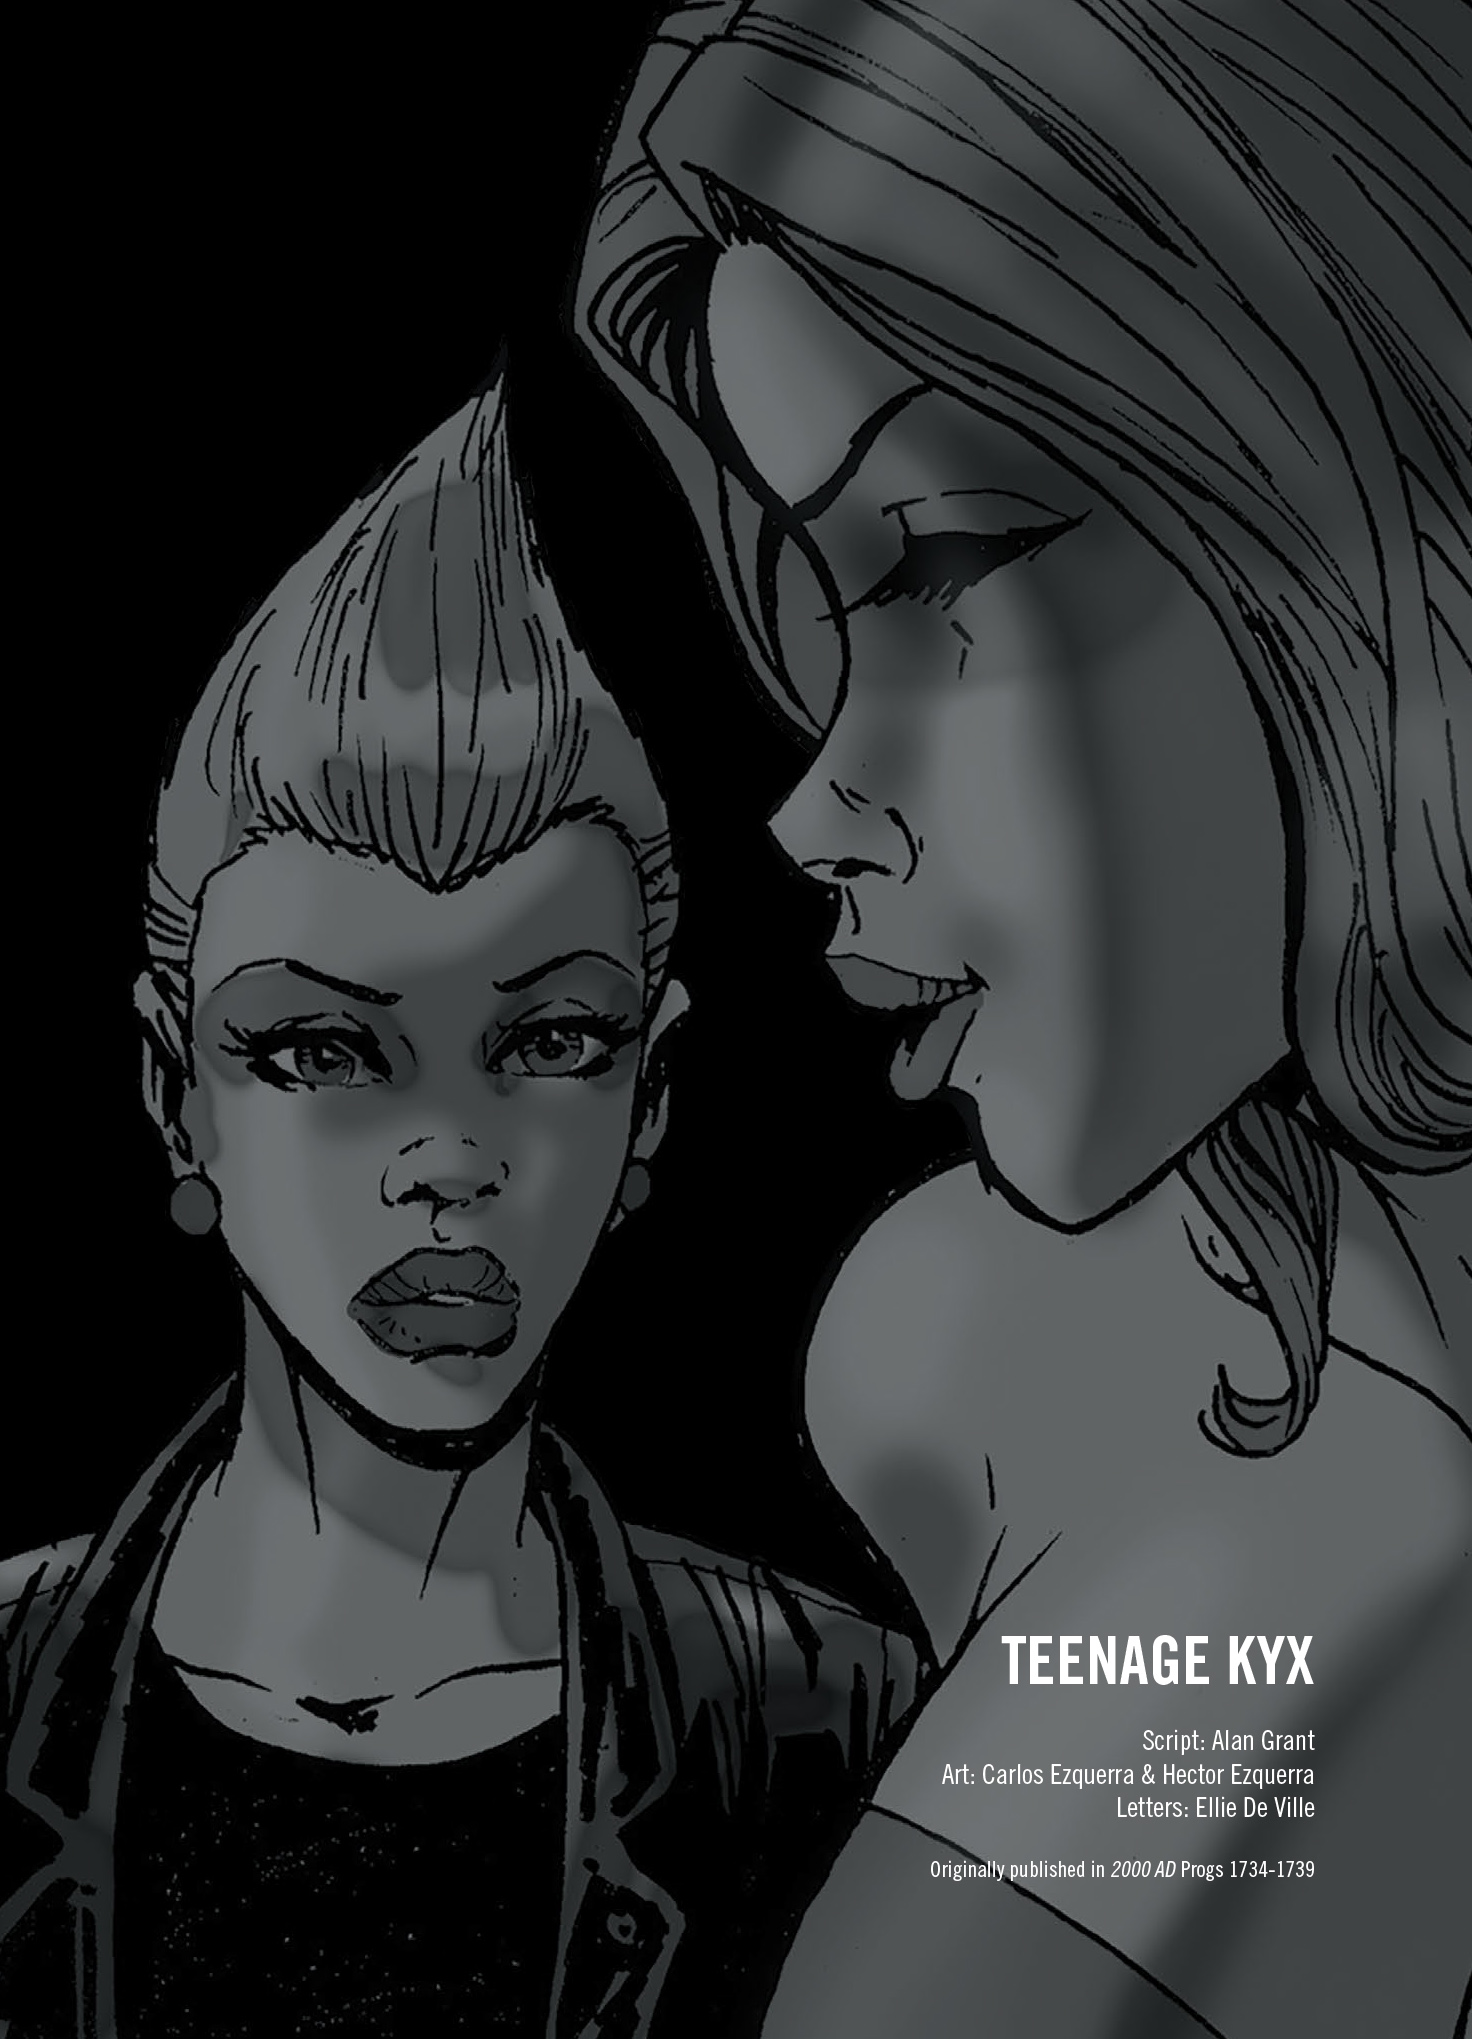 Read online Cadet Anderson: Teenage Kyx comic -  Issue # TPB - 12